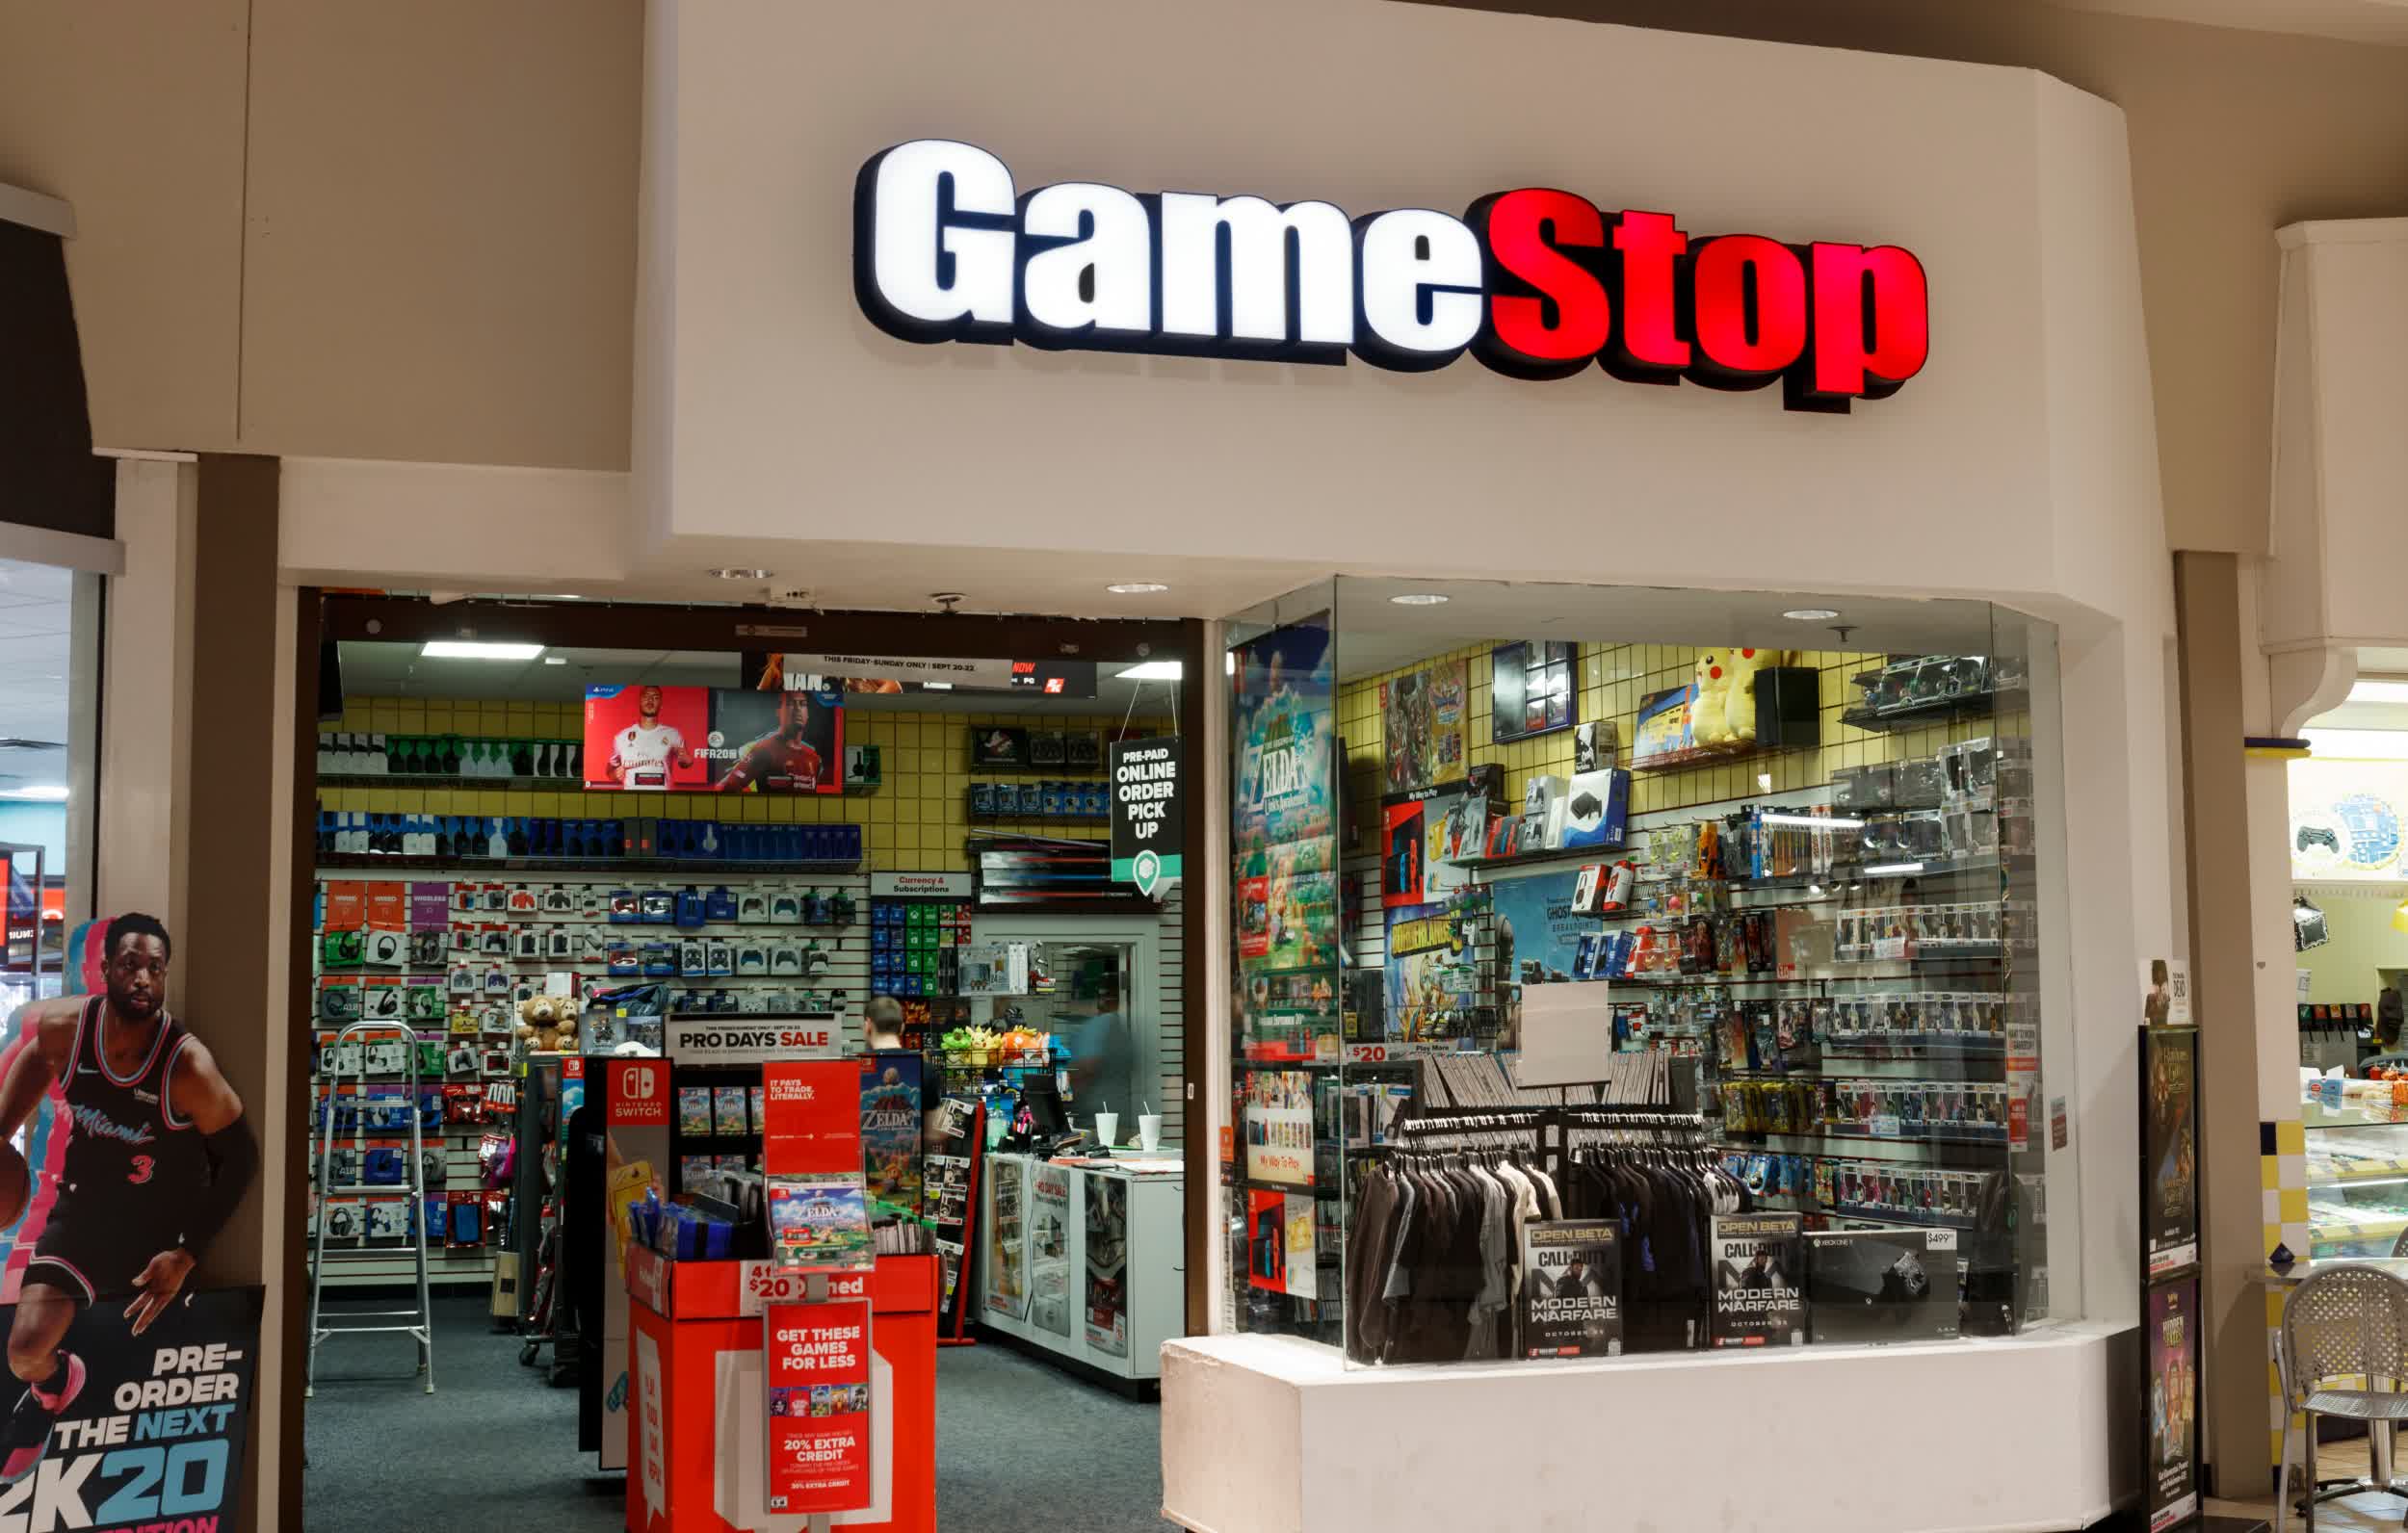 GameStop expands into PC hardware, now selling RTX 3000 cards